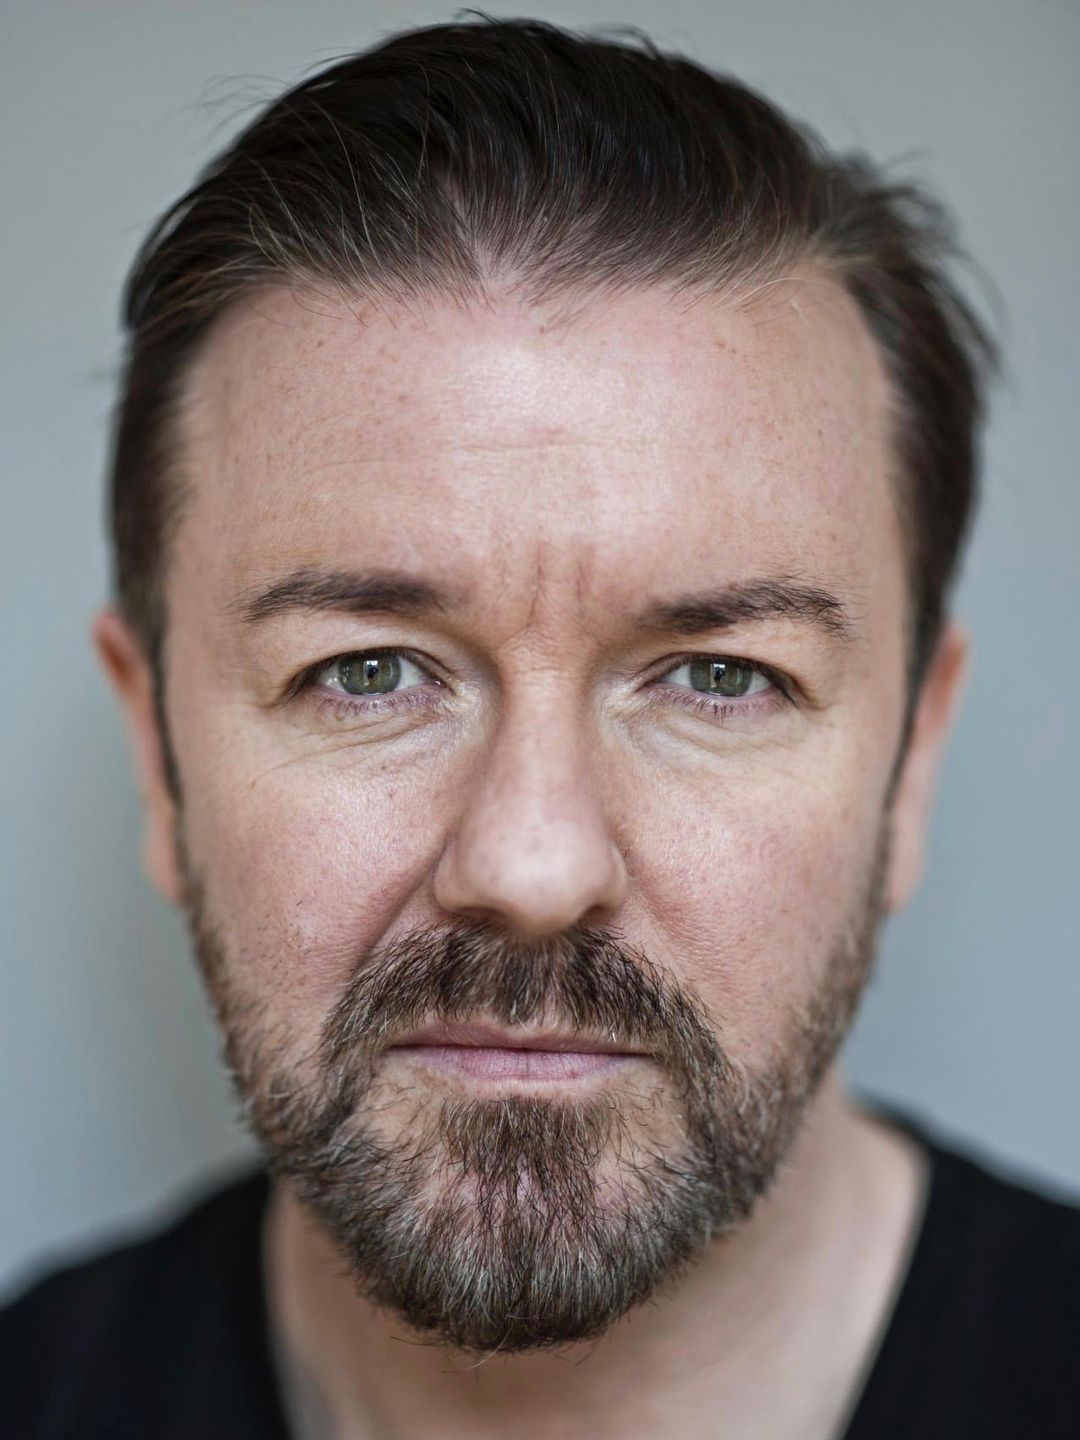 Ricky Gervais dating history